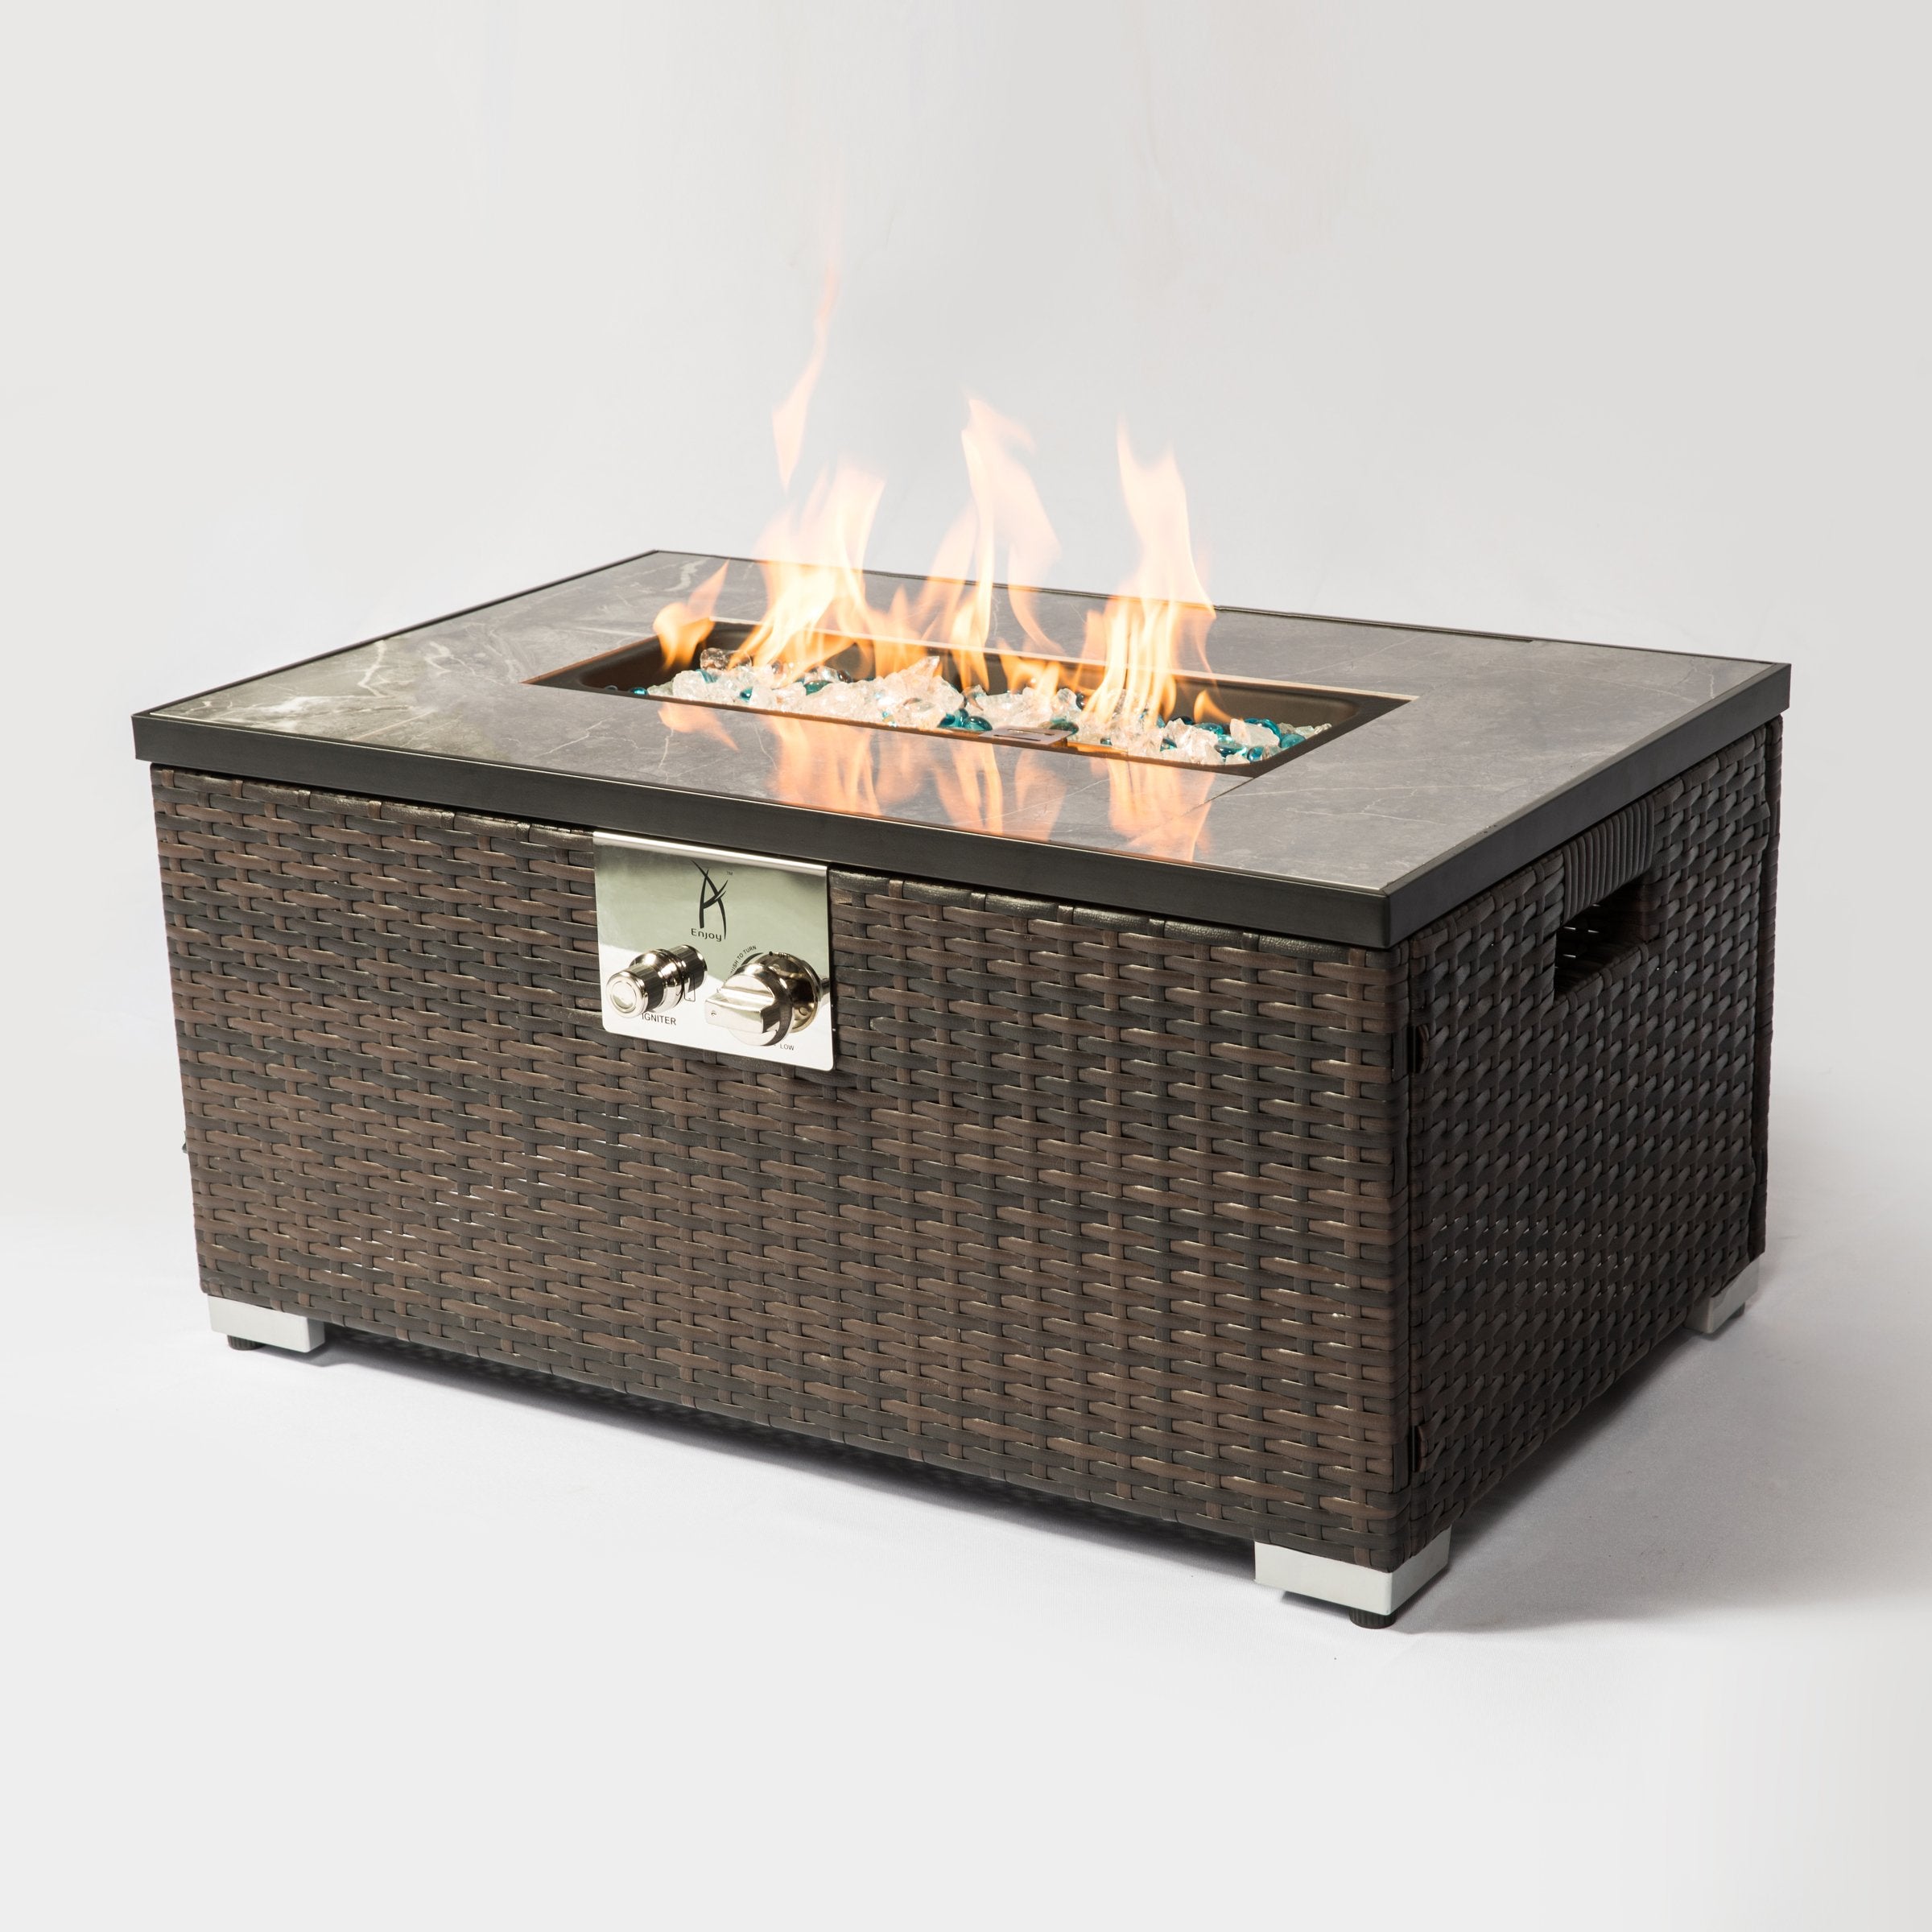 28inch Square 48000 BTU Outdoor Propane Gas Fire Pit Table, Table